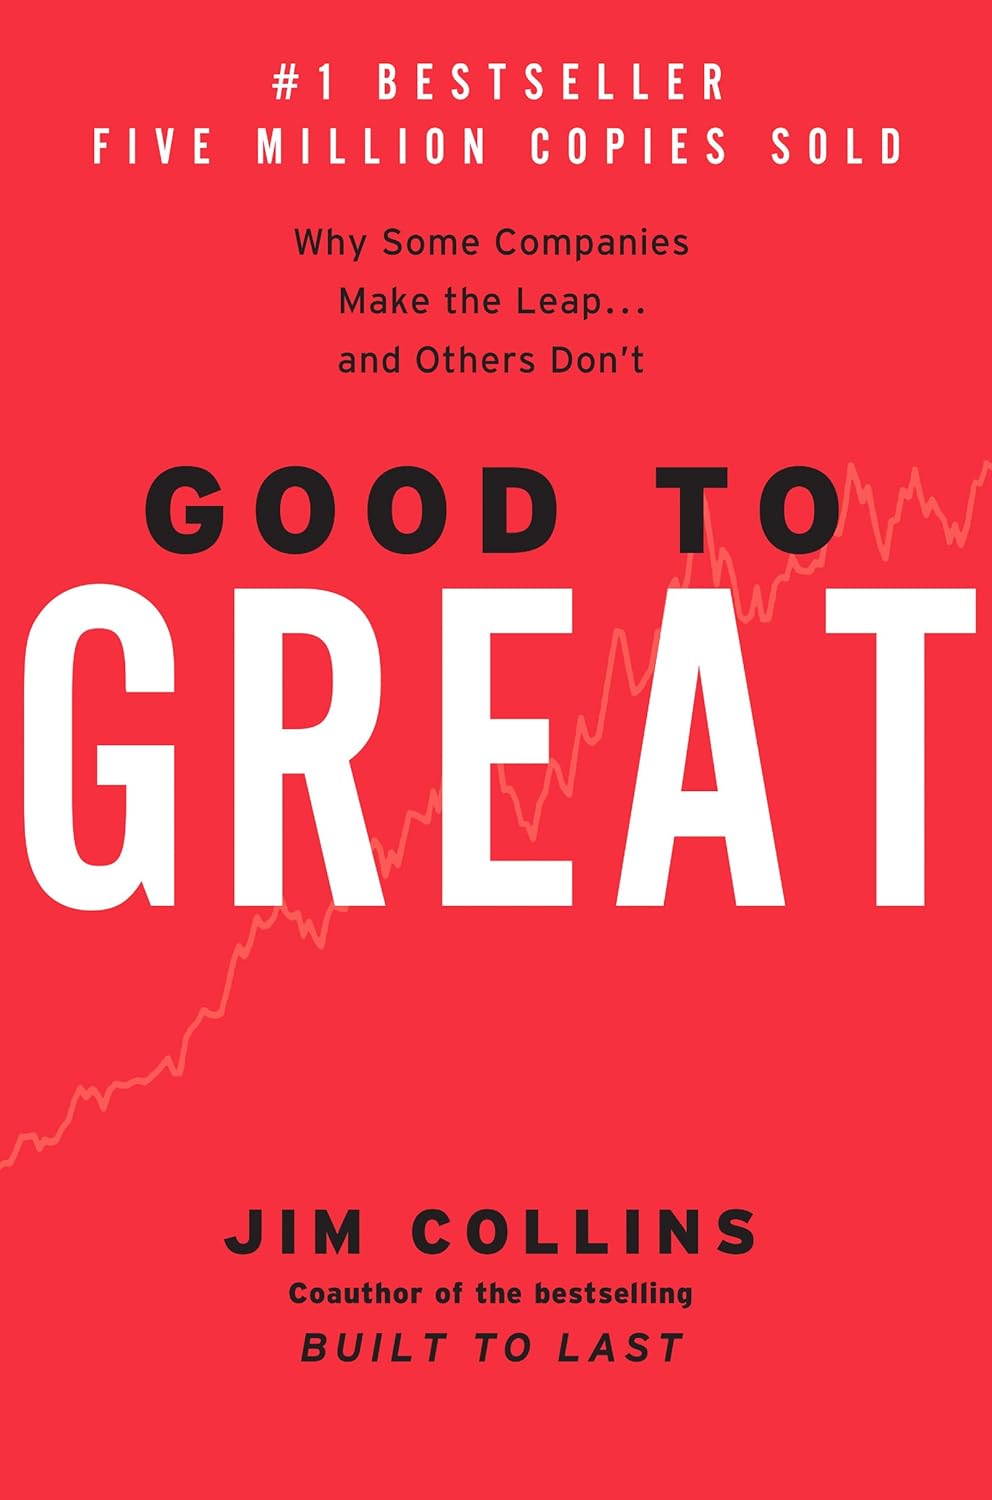 Jim Collins - Good to Great. Why Some Companies Make the Leap and Others Don_t